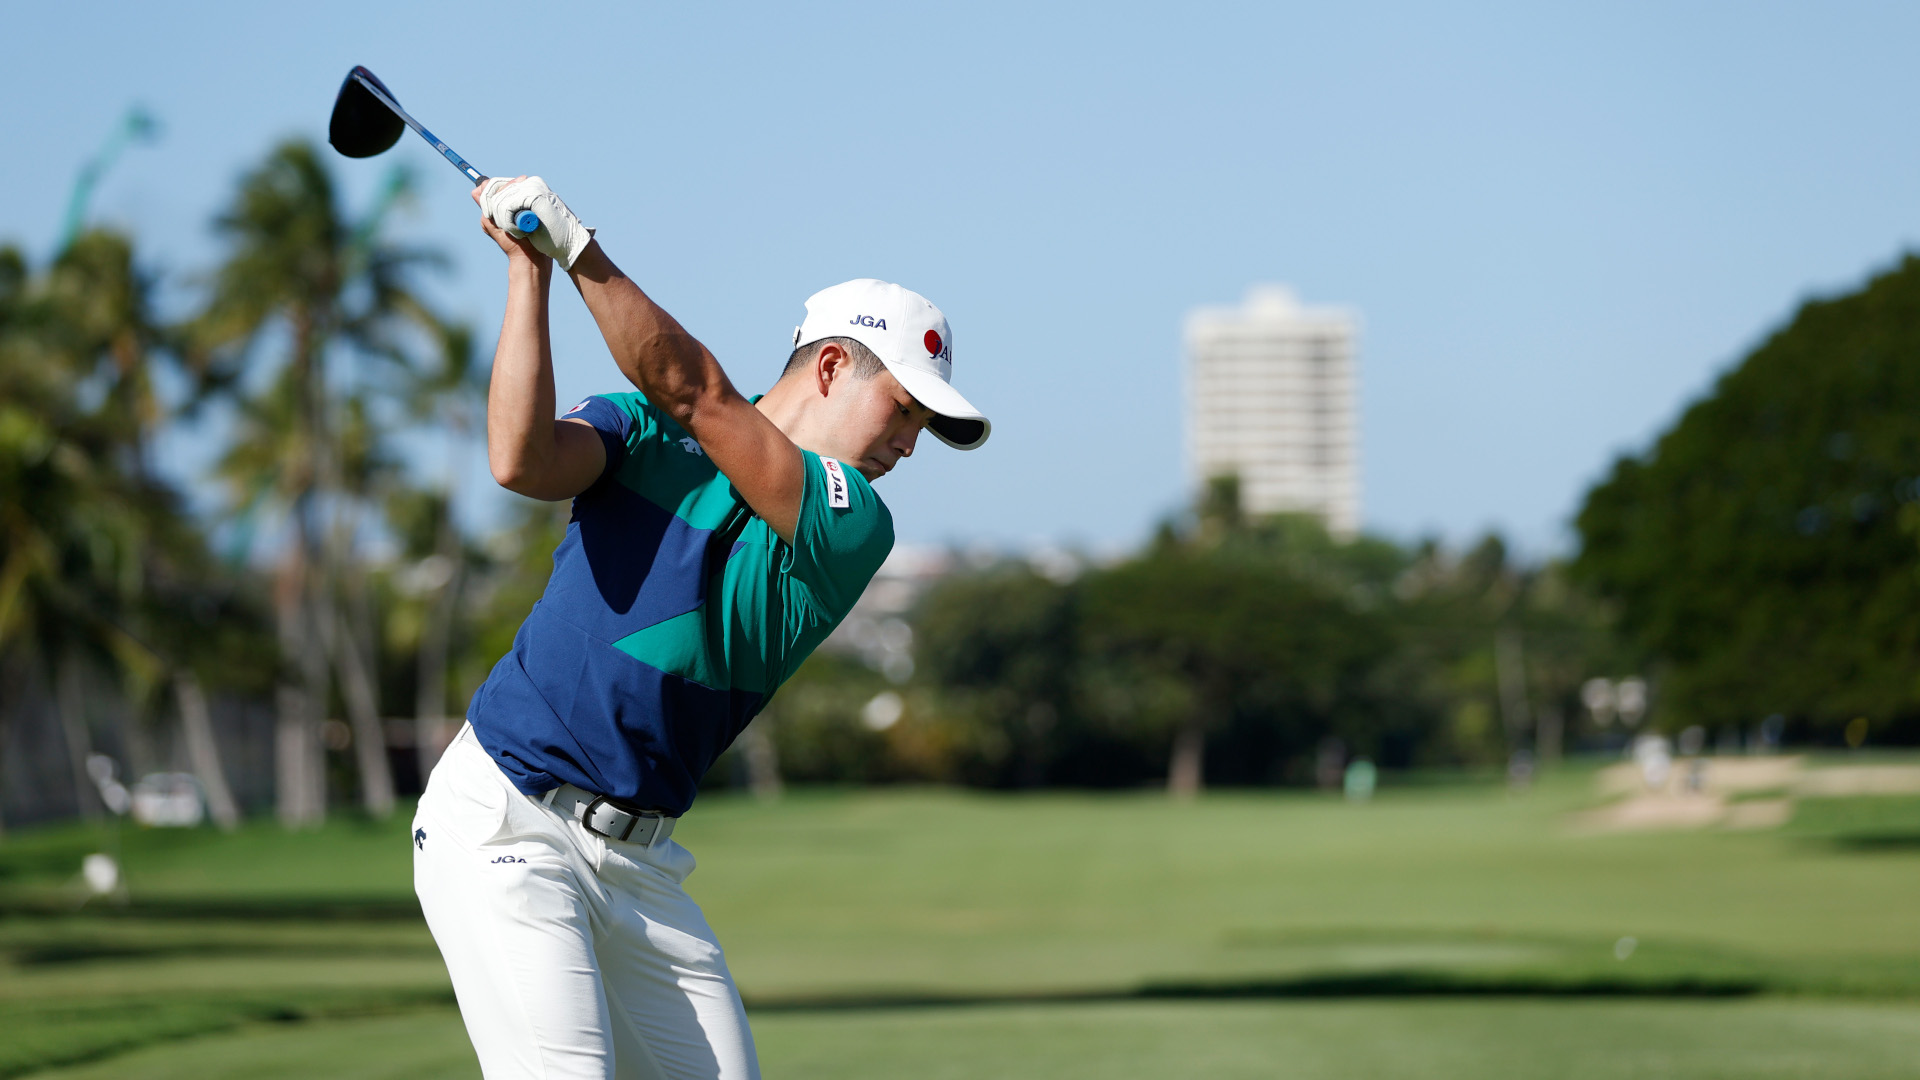 Sony Open in Hawaii live stream 2022 how to watch online and without cable TechRadar